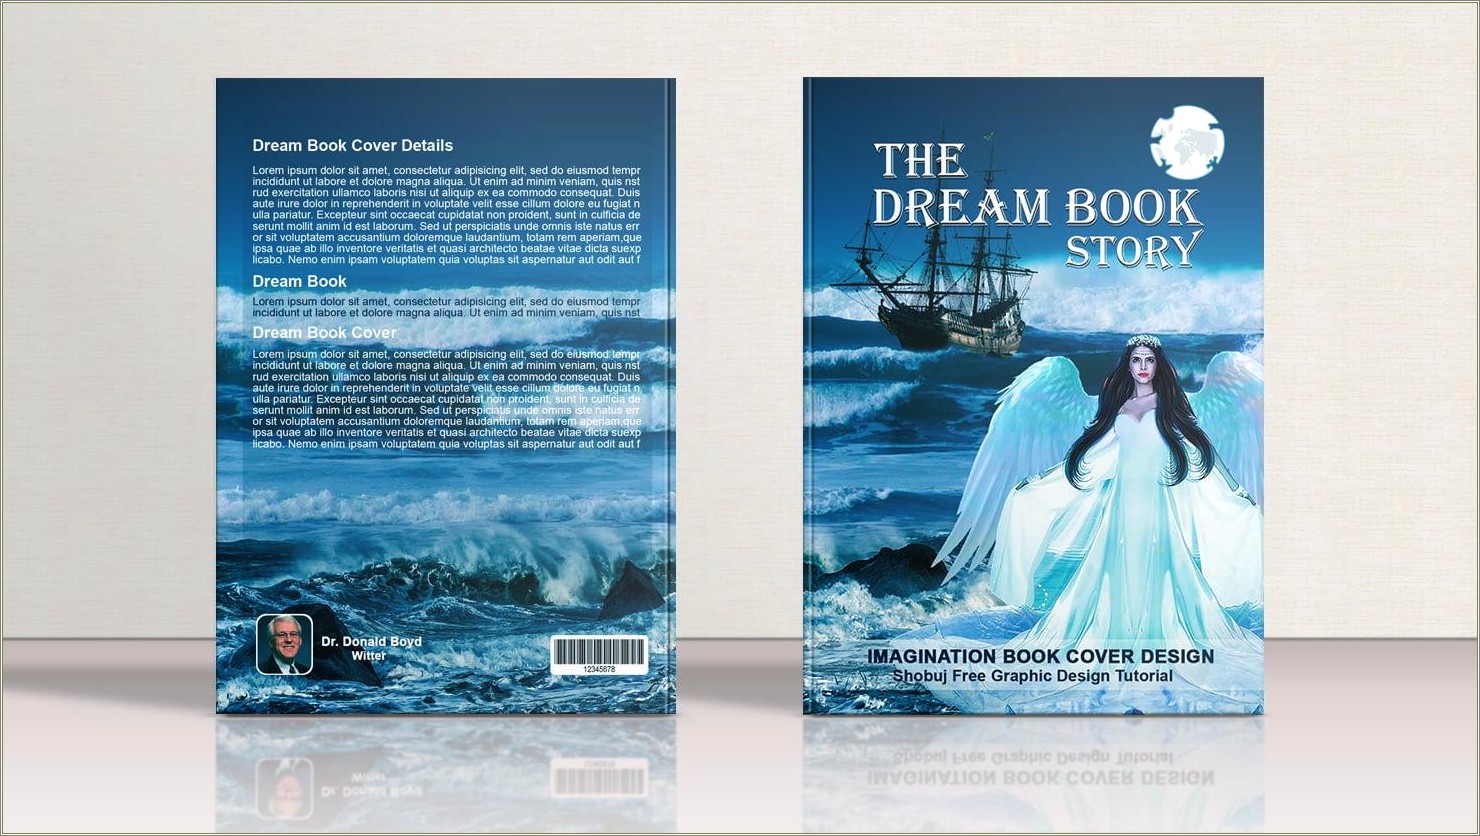 Free 3d Ebook Cover Photoshop Template